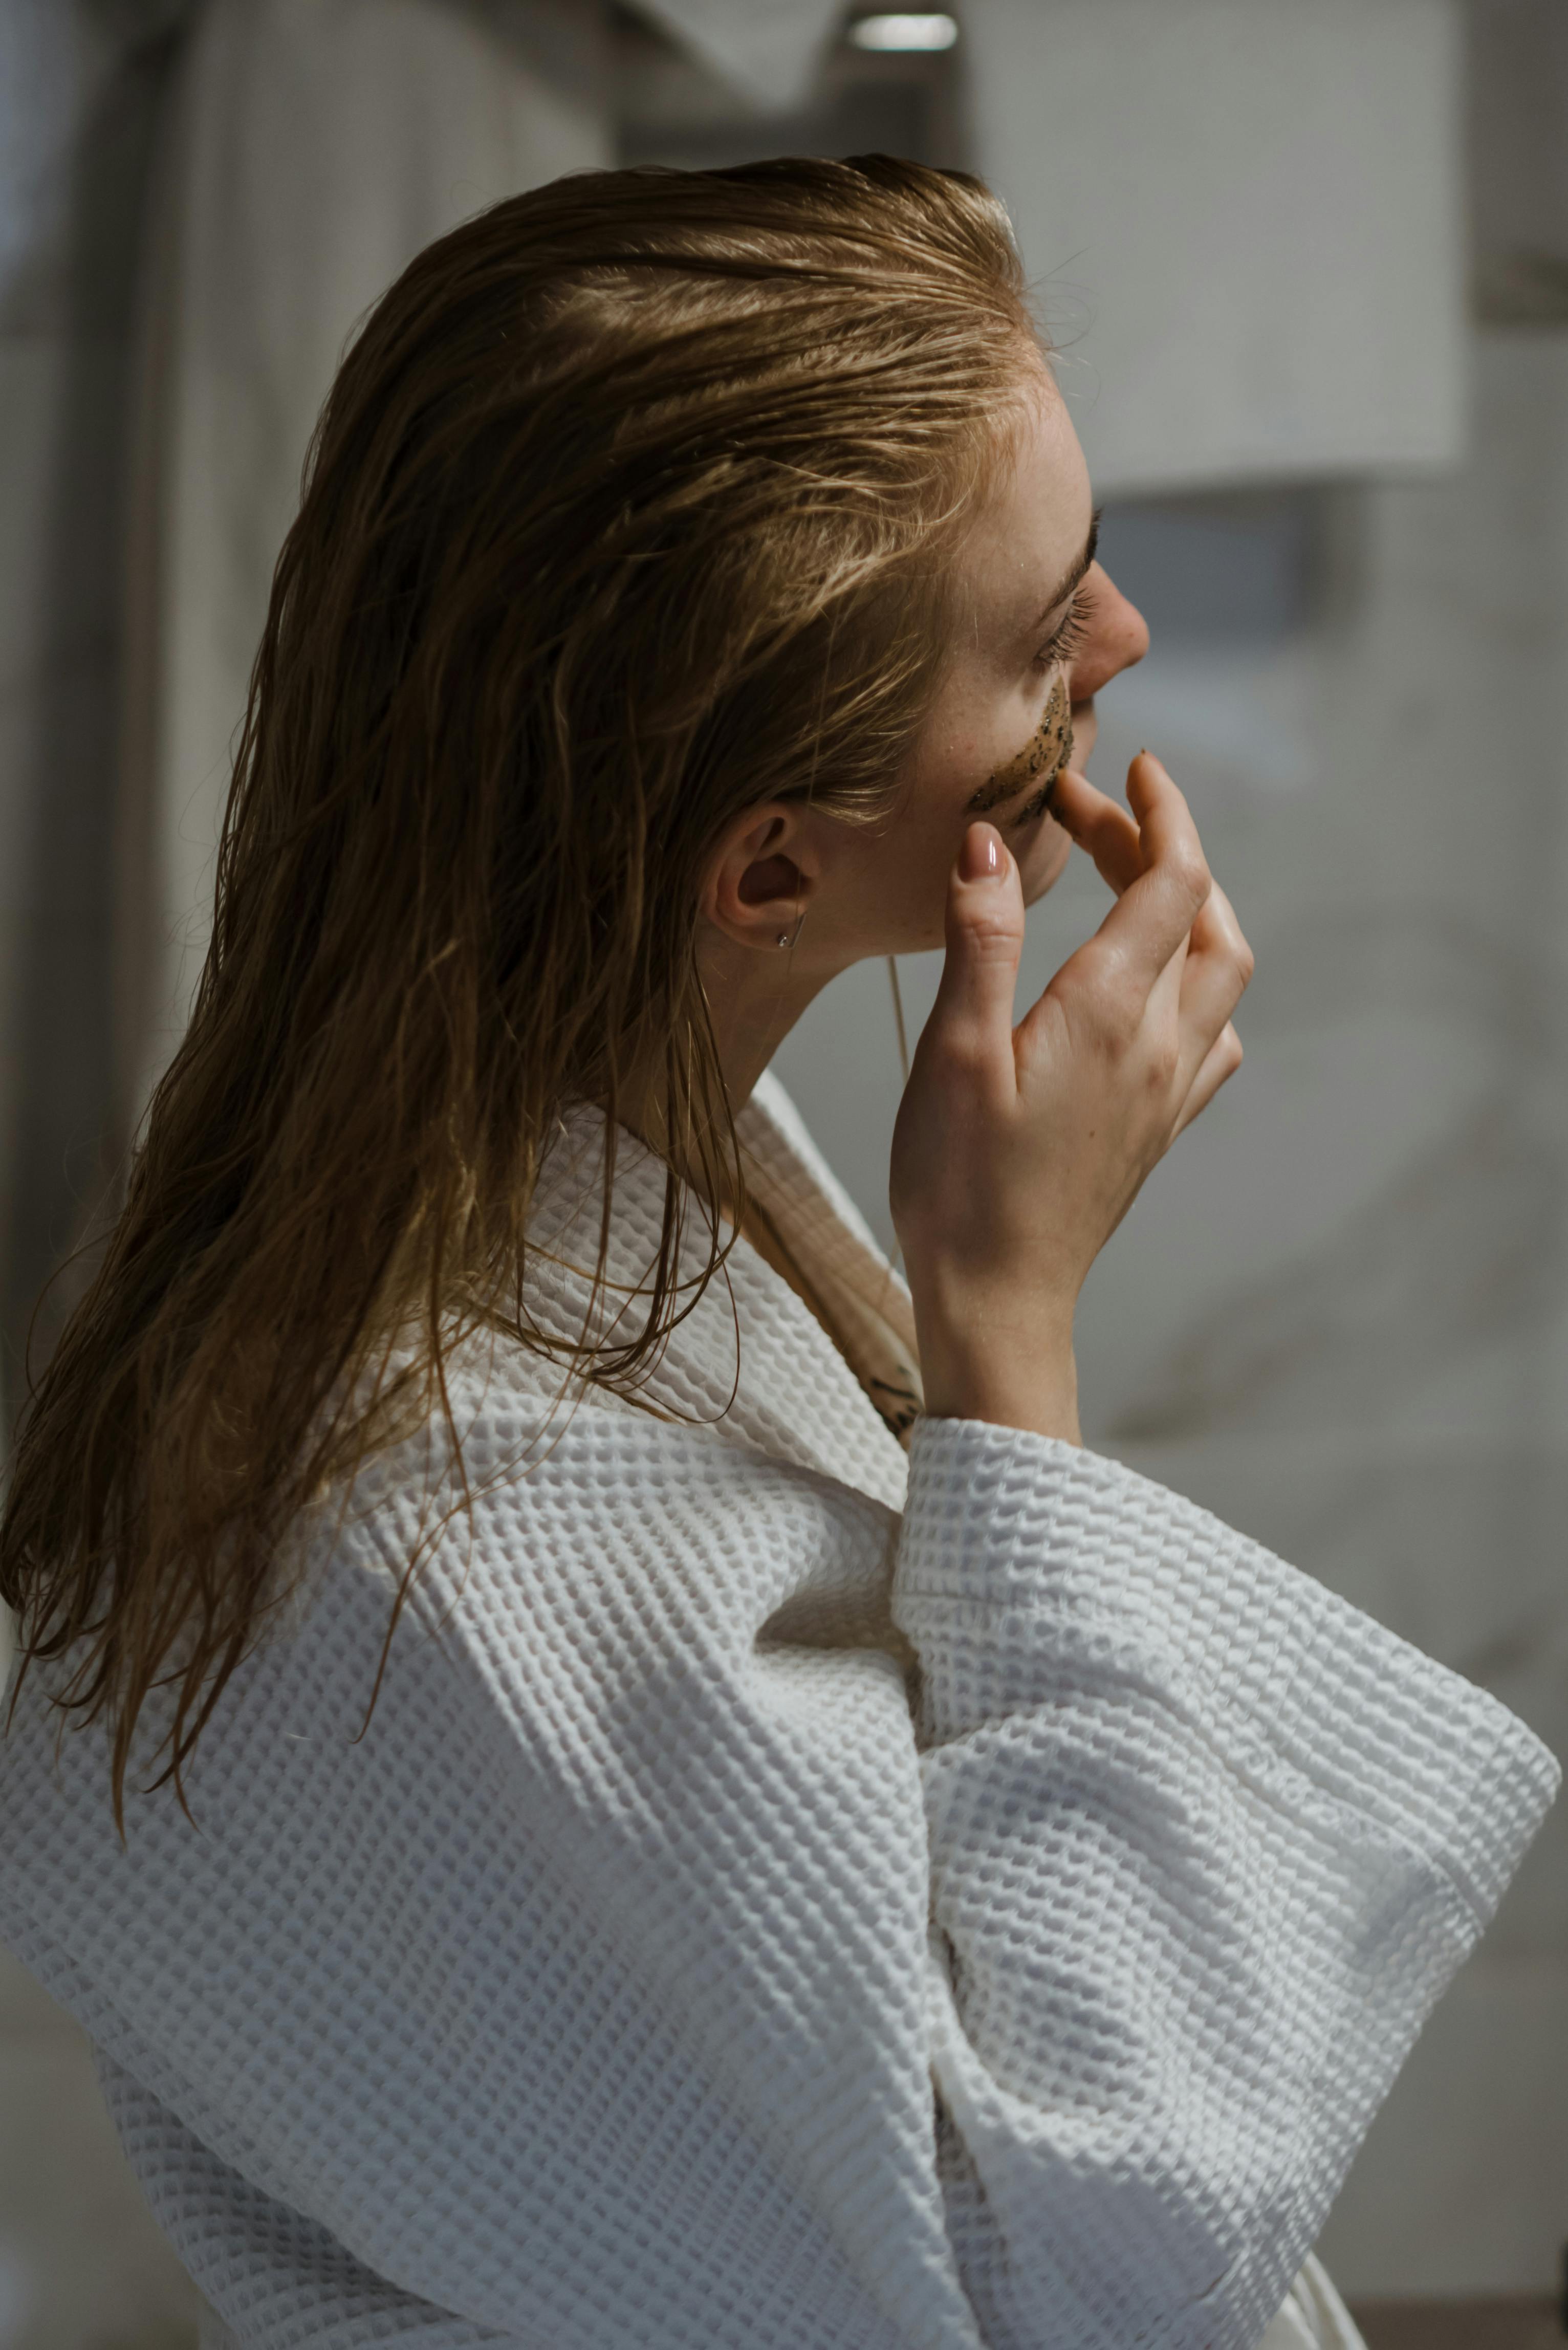 A woman applying facial products after taking a shower | Source: Pexels